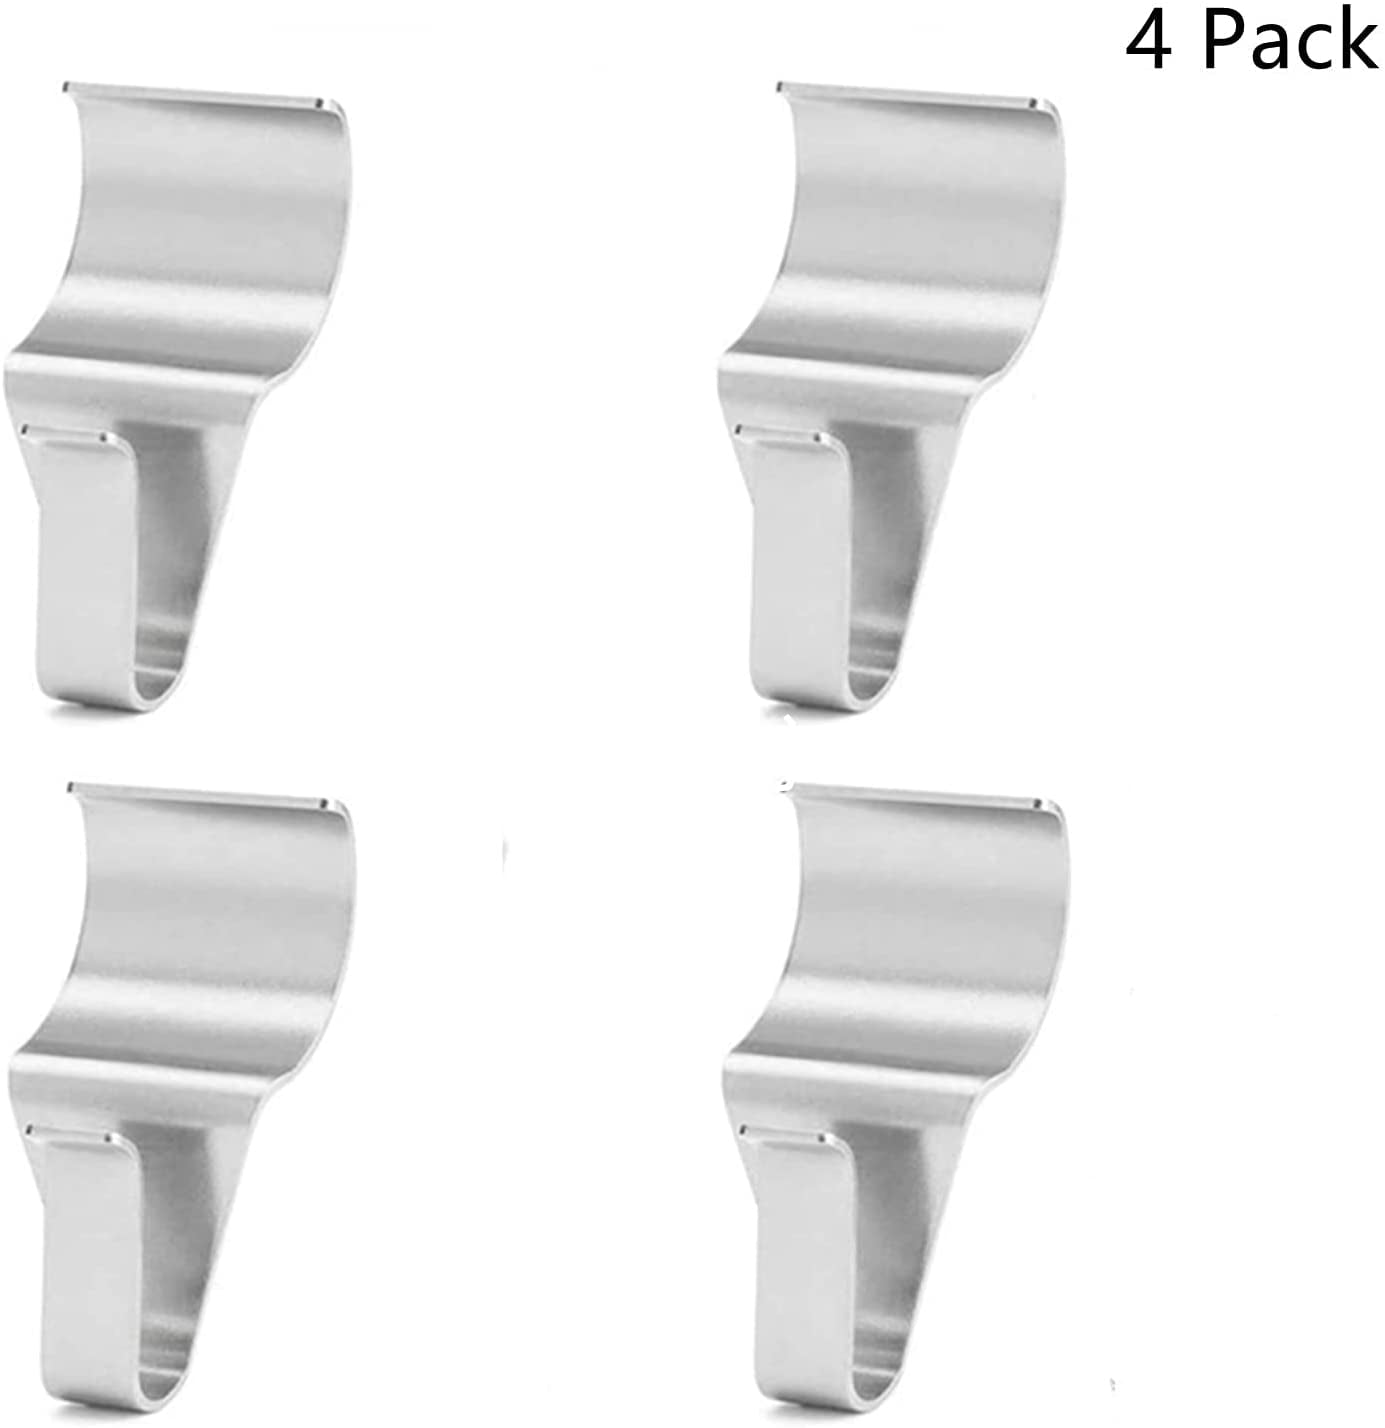 4 Pack Stainless Steel No-Hole Hook Vinyl Siding Hangers Low Profile 